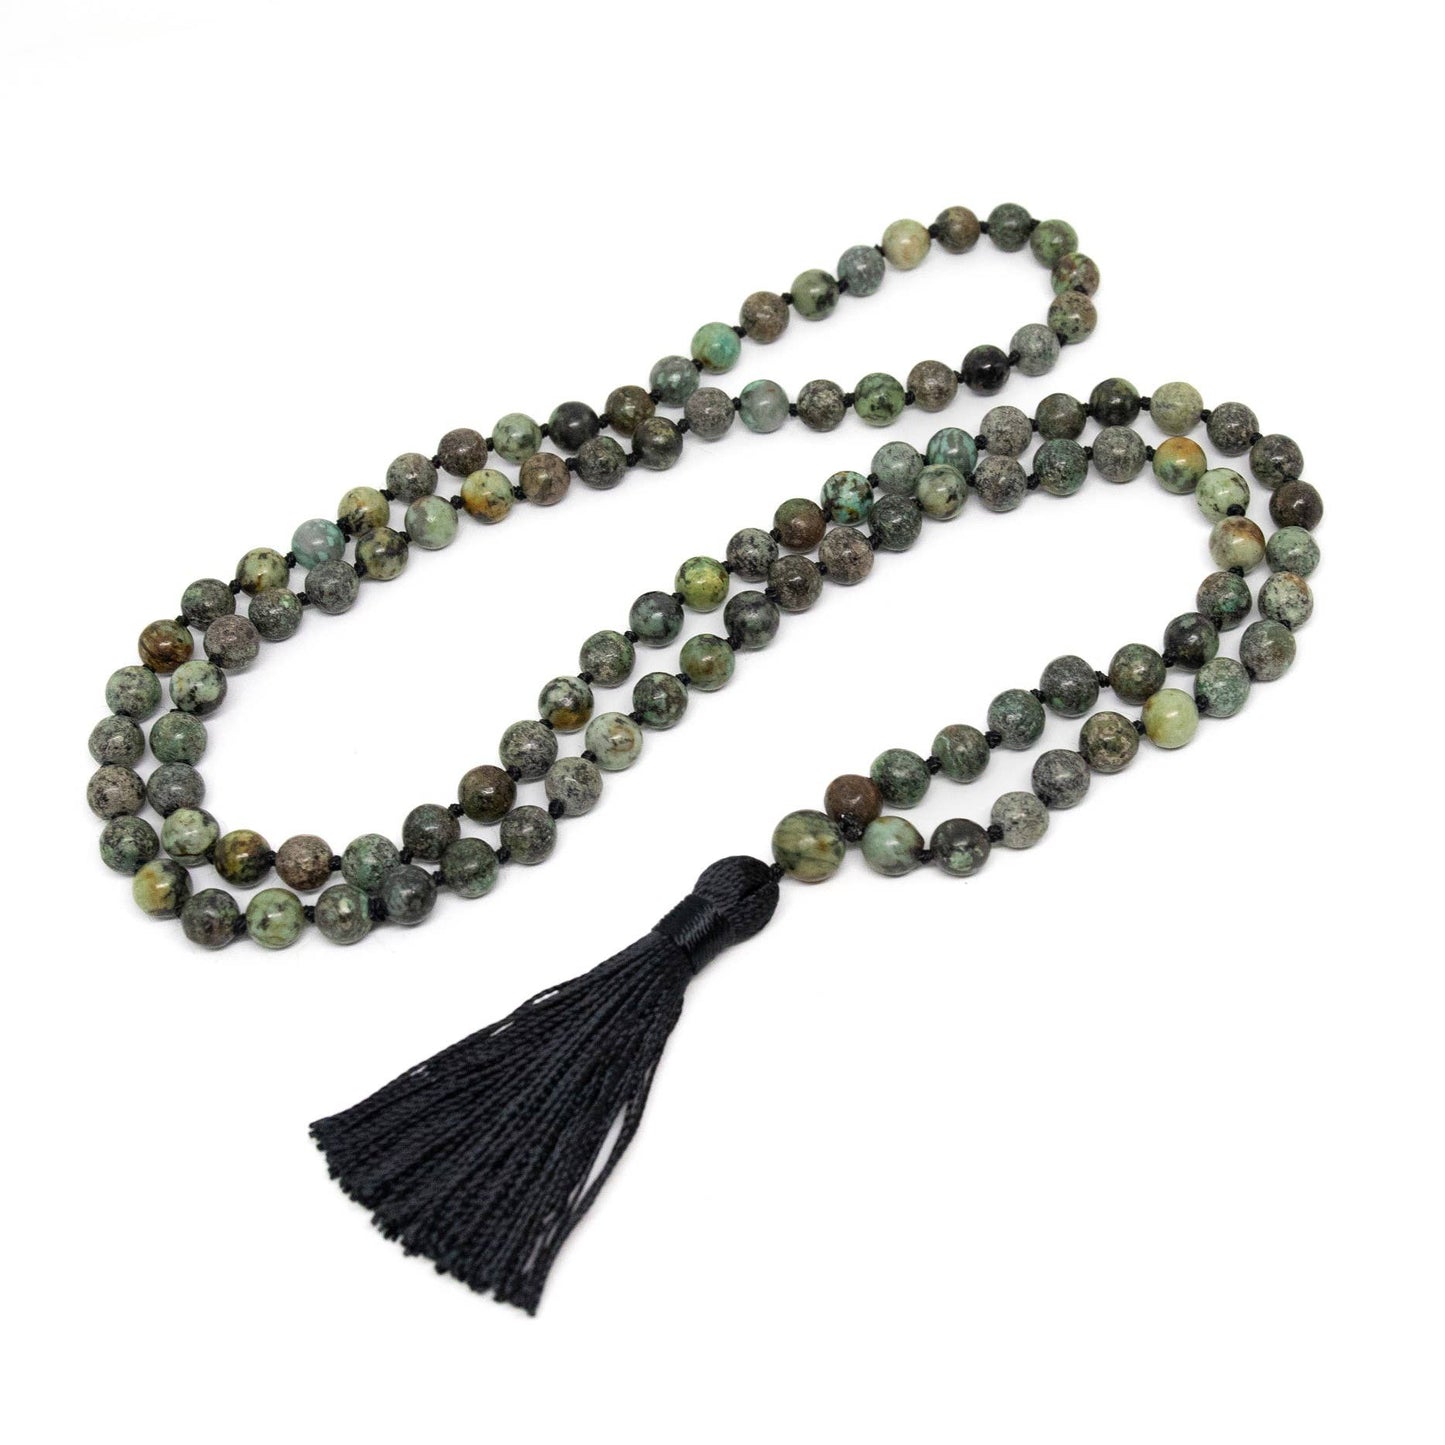 African Turquoise Knotted 108 Mala - Prayer Beads - 8mm (1 Pack)